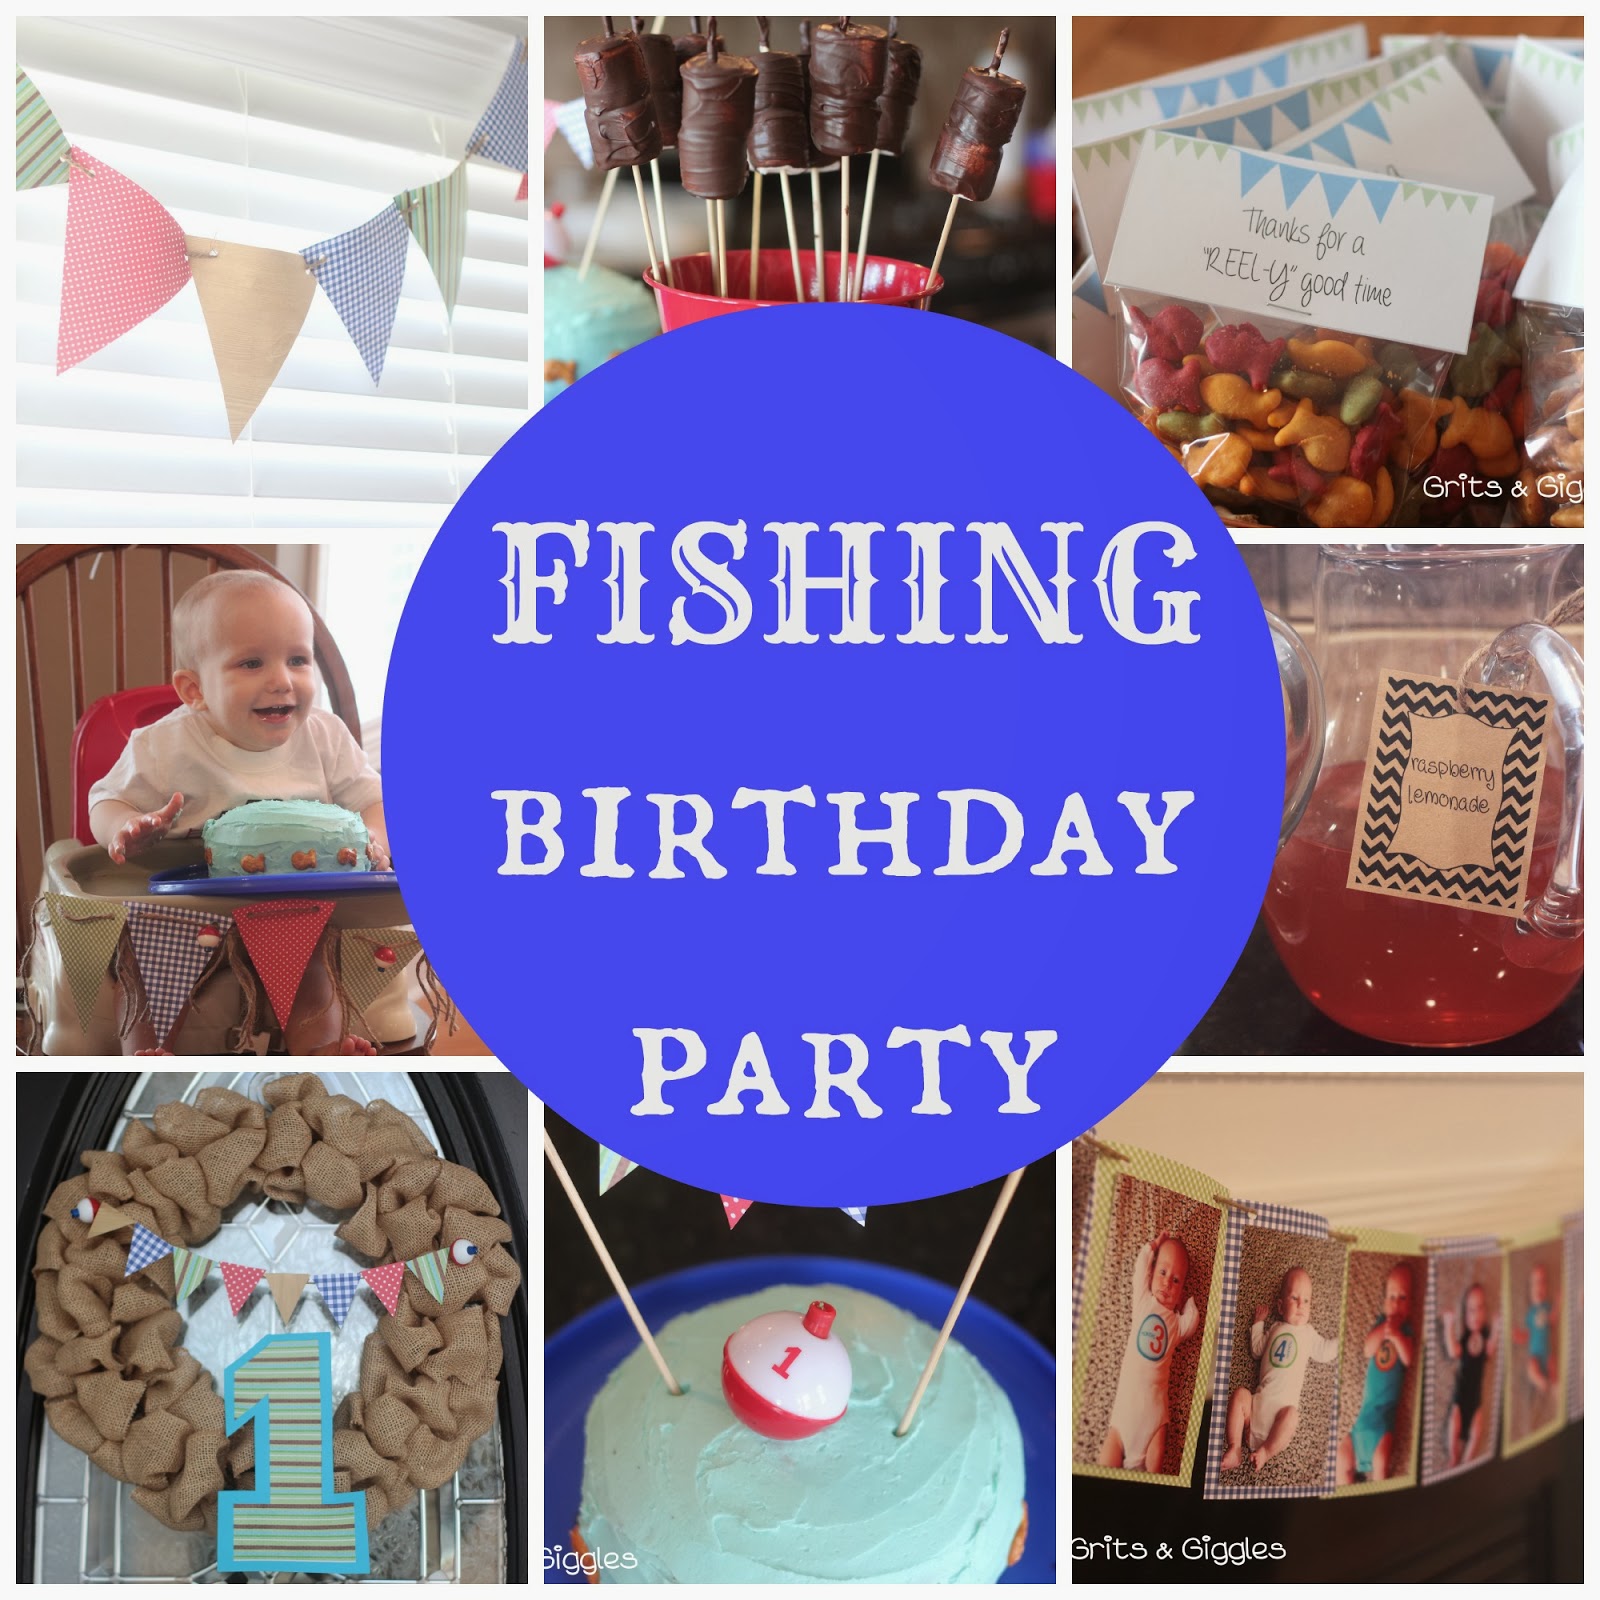 Grits & Giggles: A Reely Good Time: Fishing Birthday Party